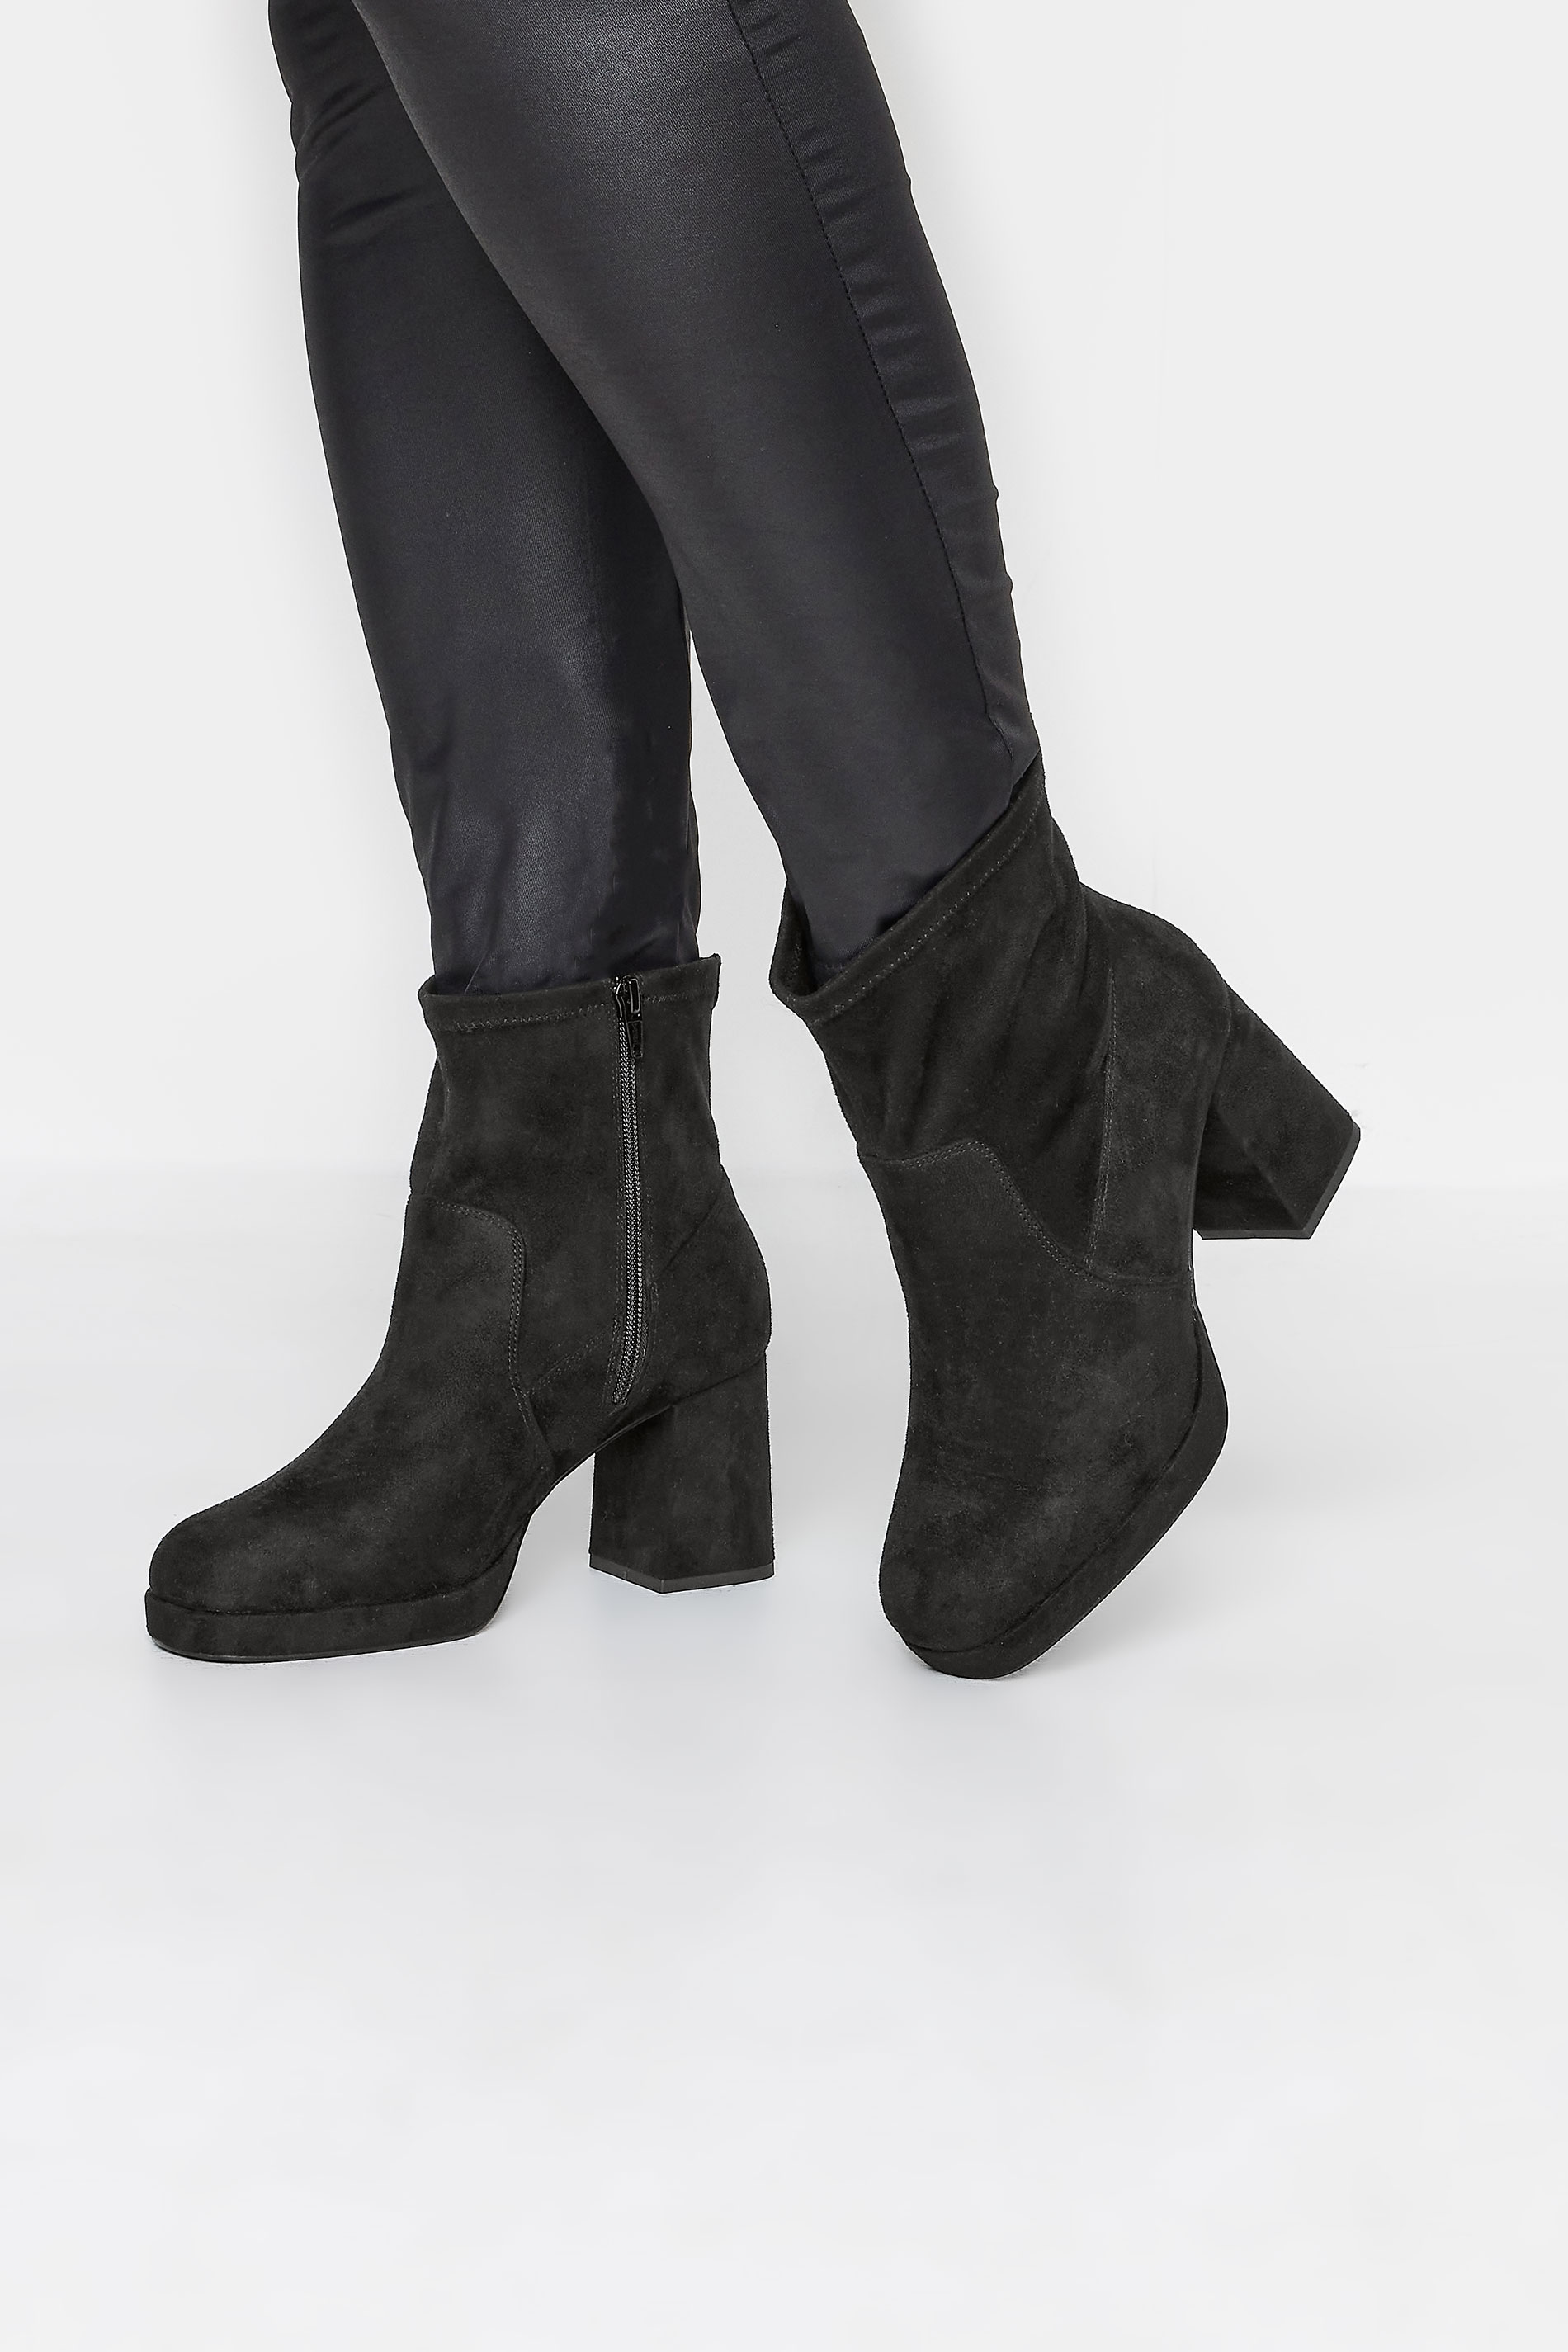 LIMITED COLLECTION Curve Black Platform Ankle Boots In Extra Wide EEE Fit | Yours Clothing  1